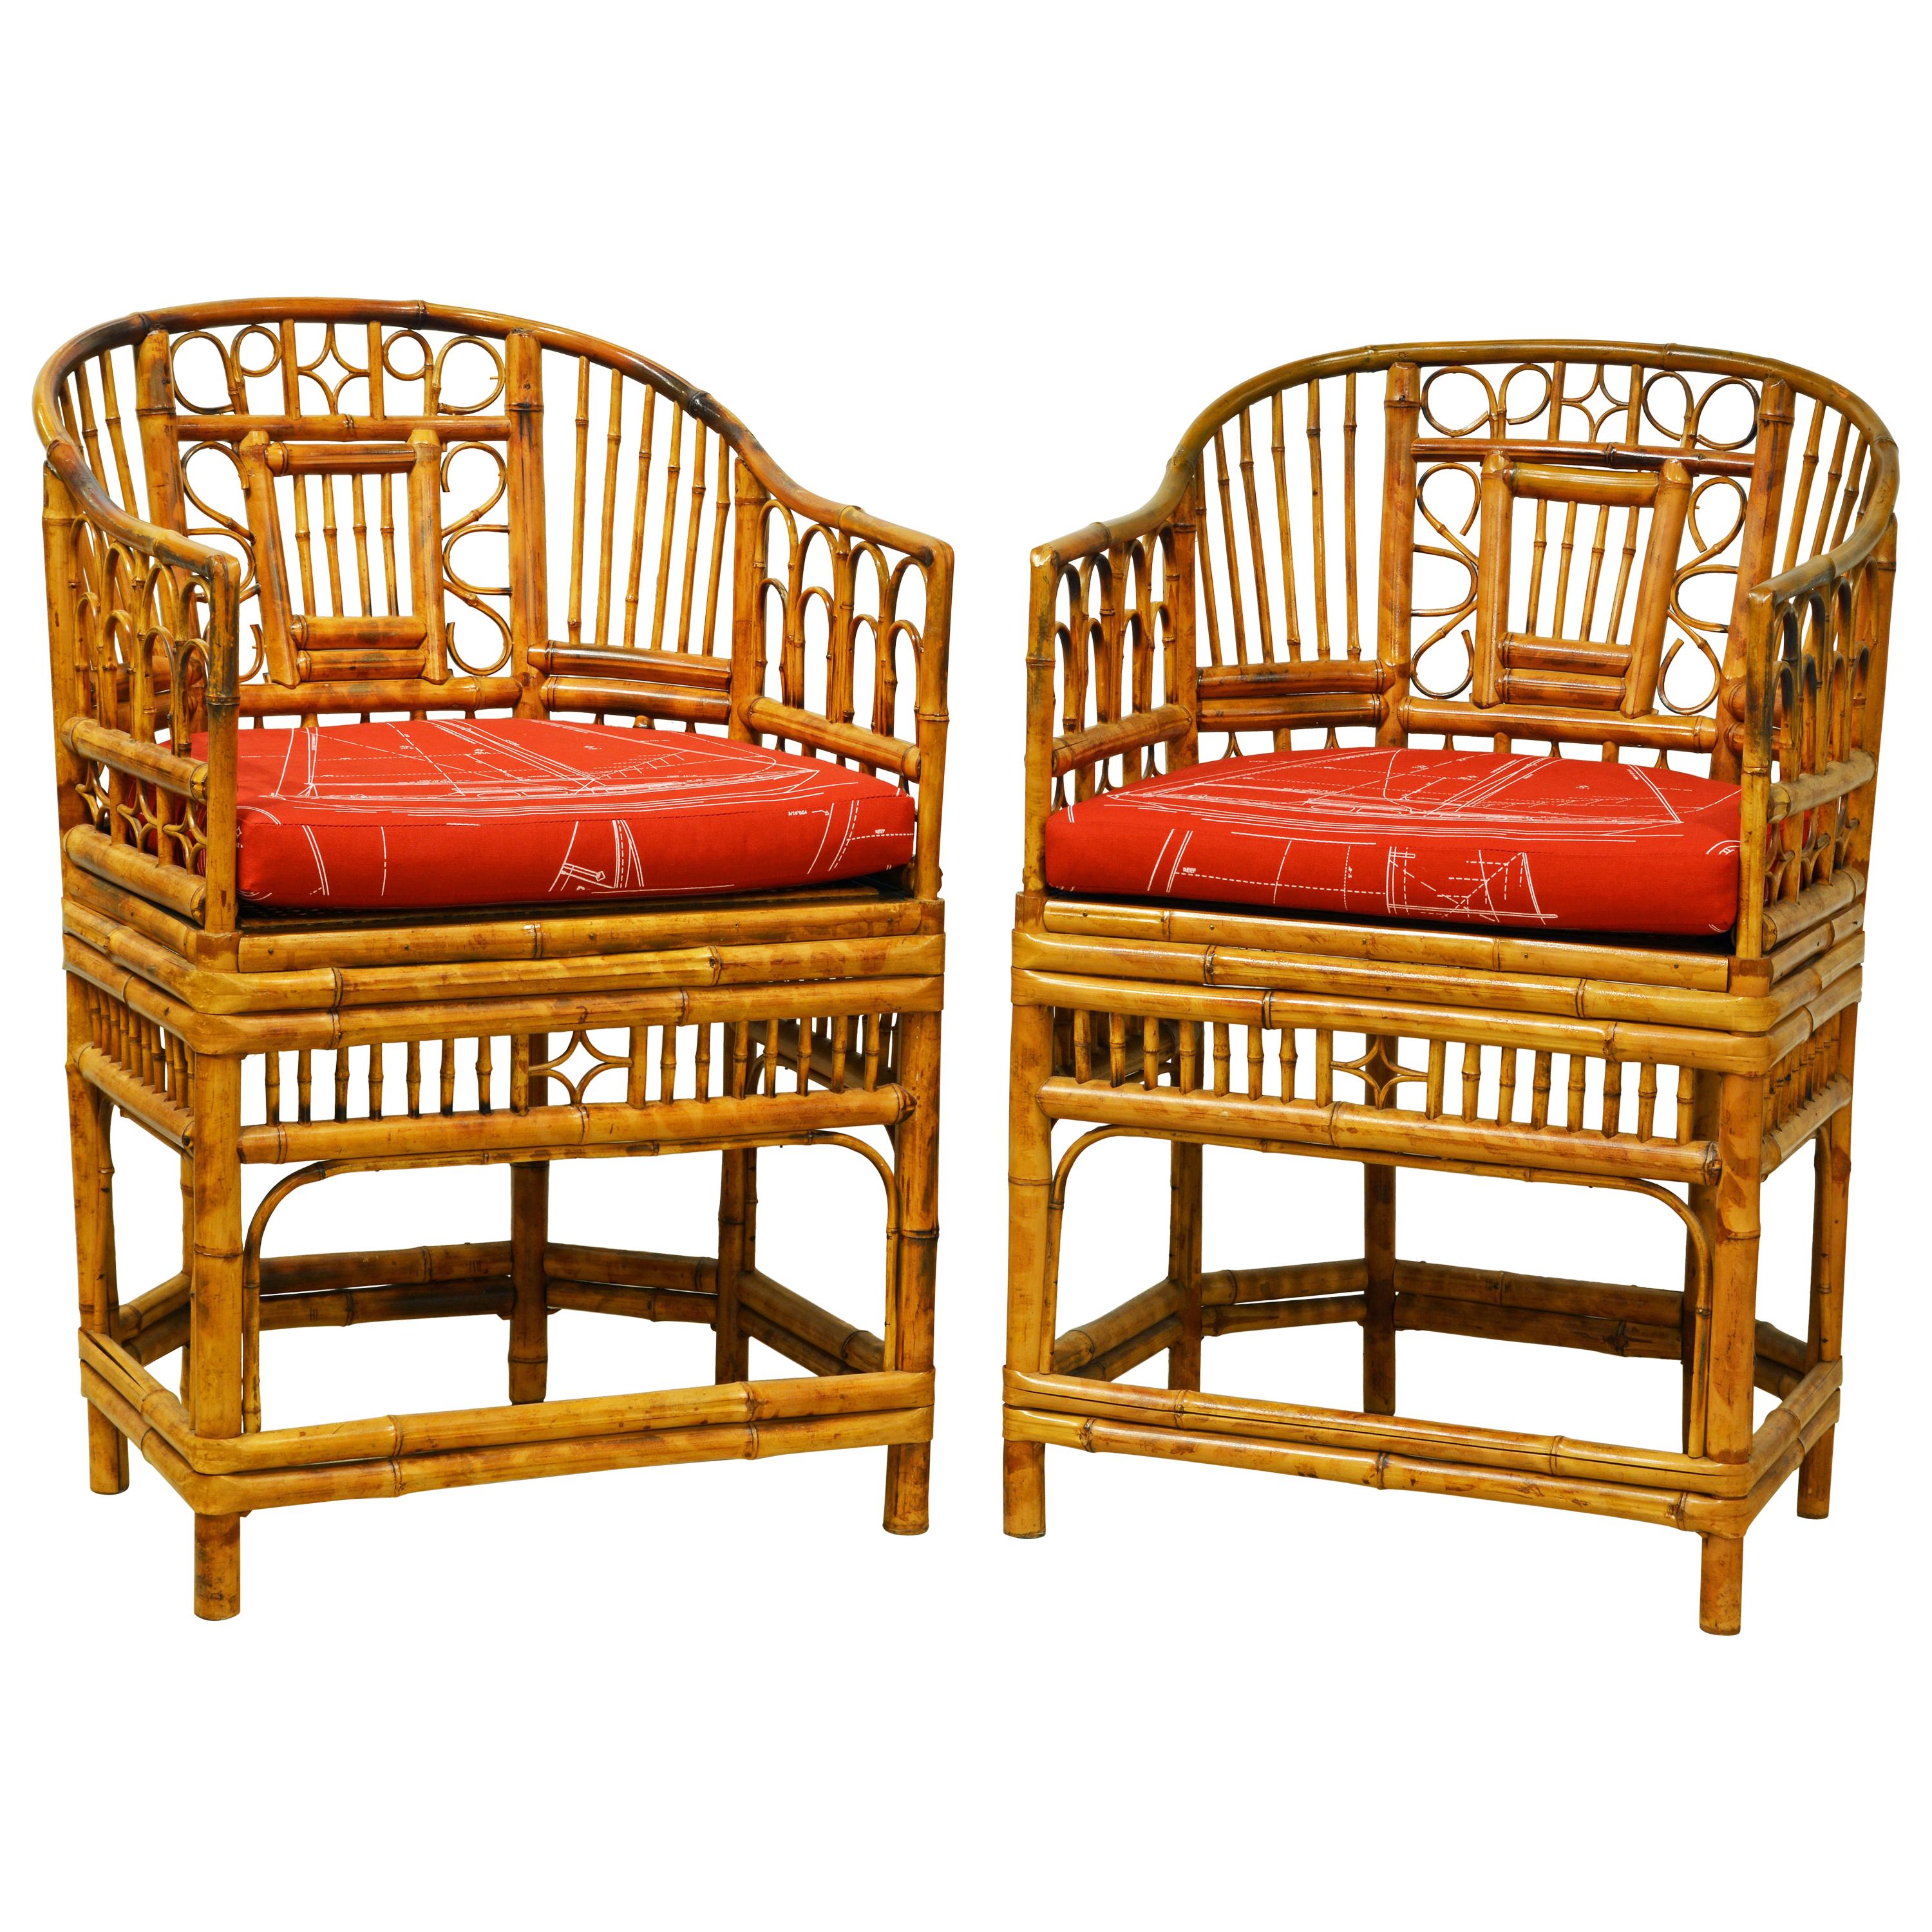 Pair of Iconic Brighton Pavilion Style Chinoiserie Chippendale Bamboo Armchairs